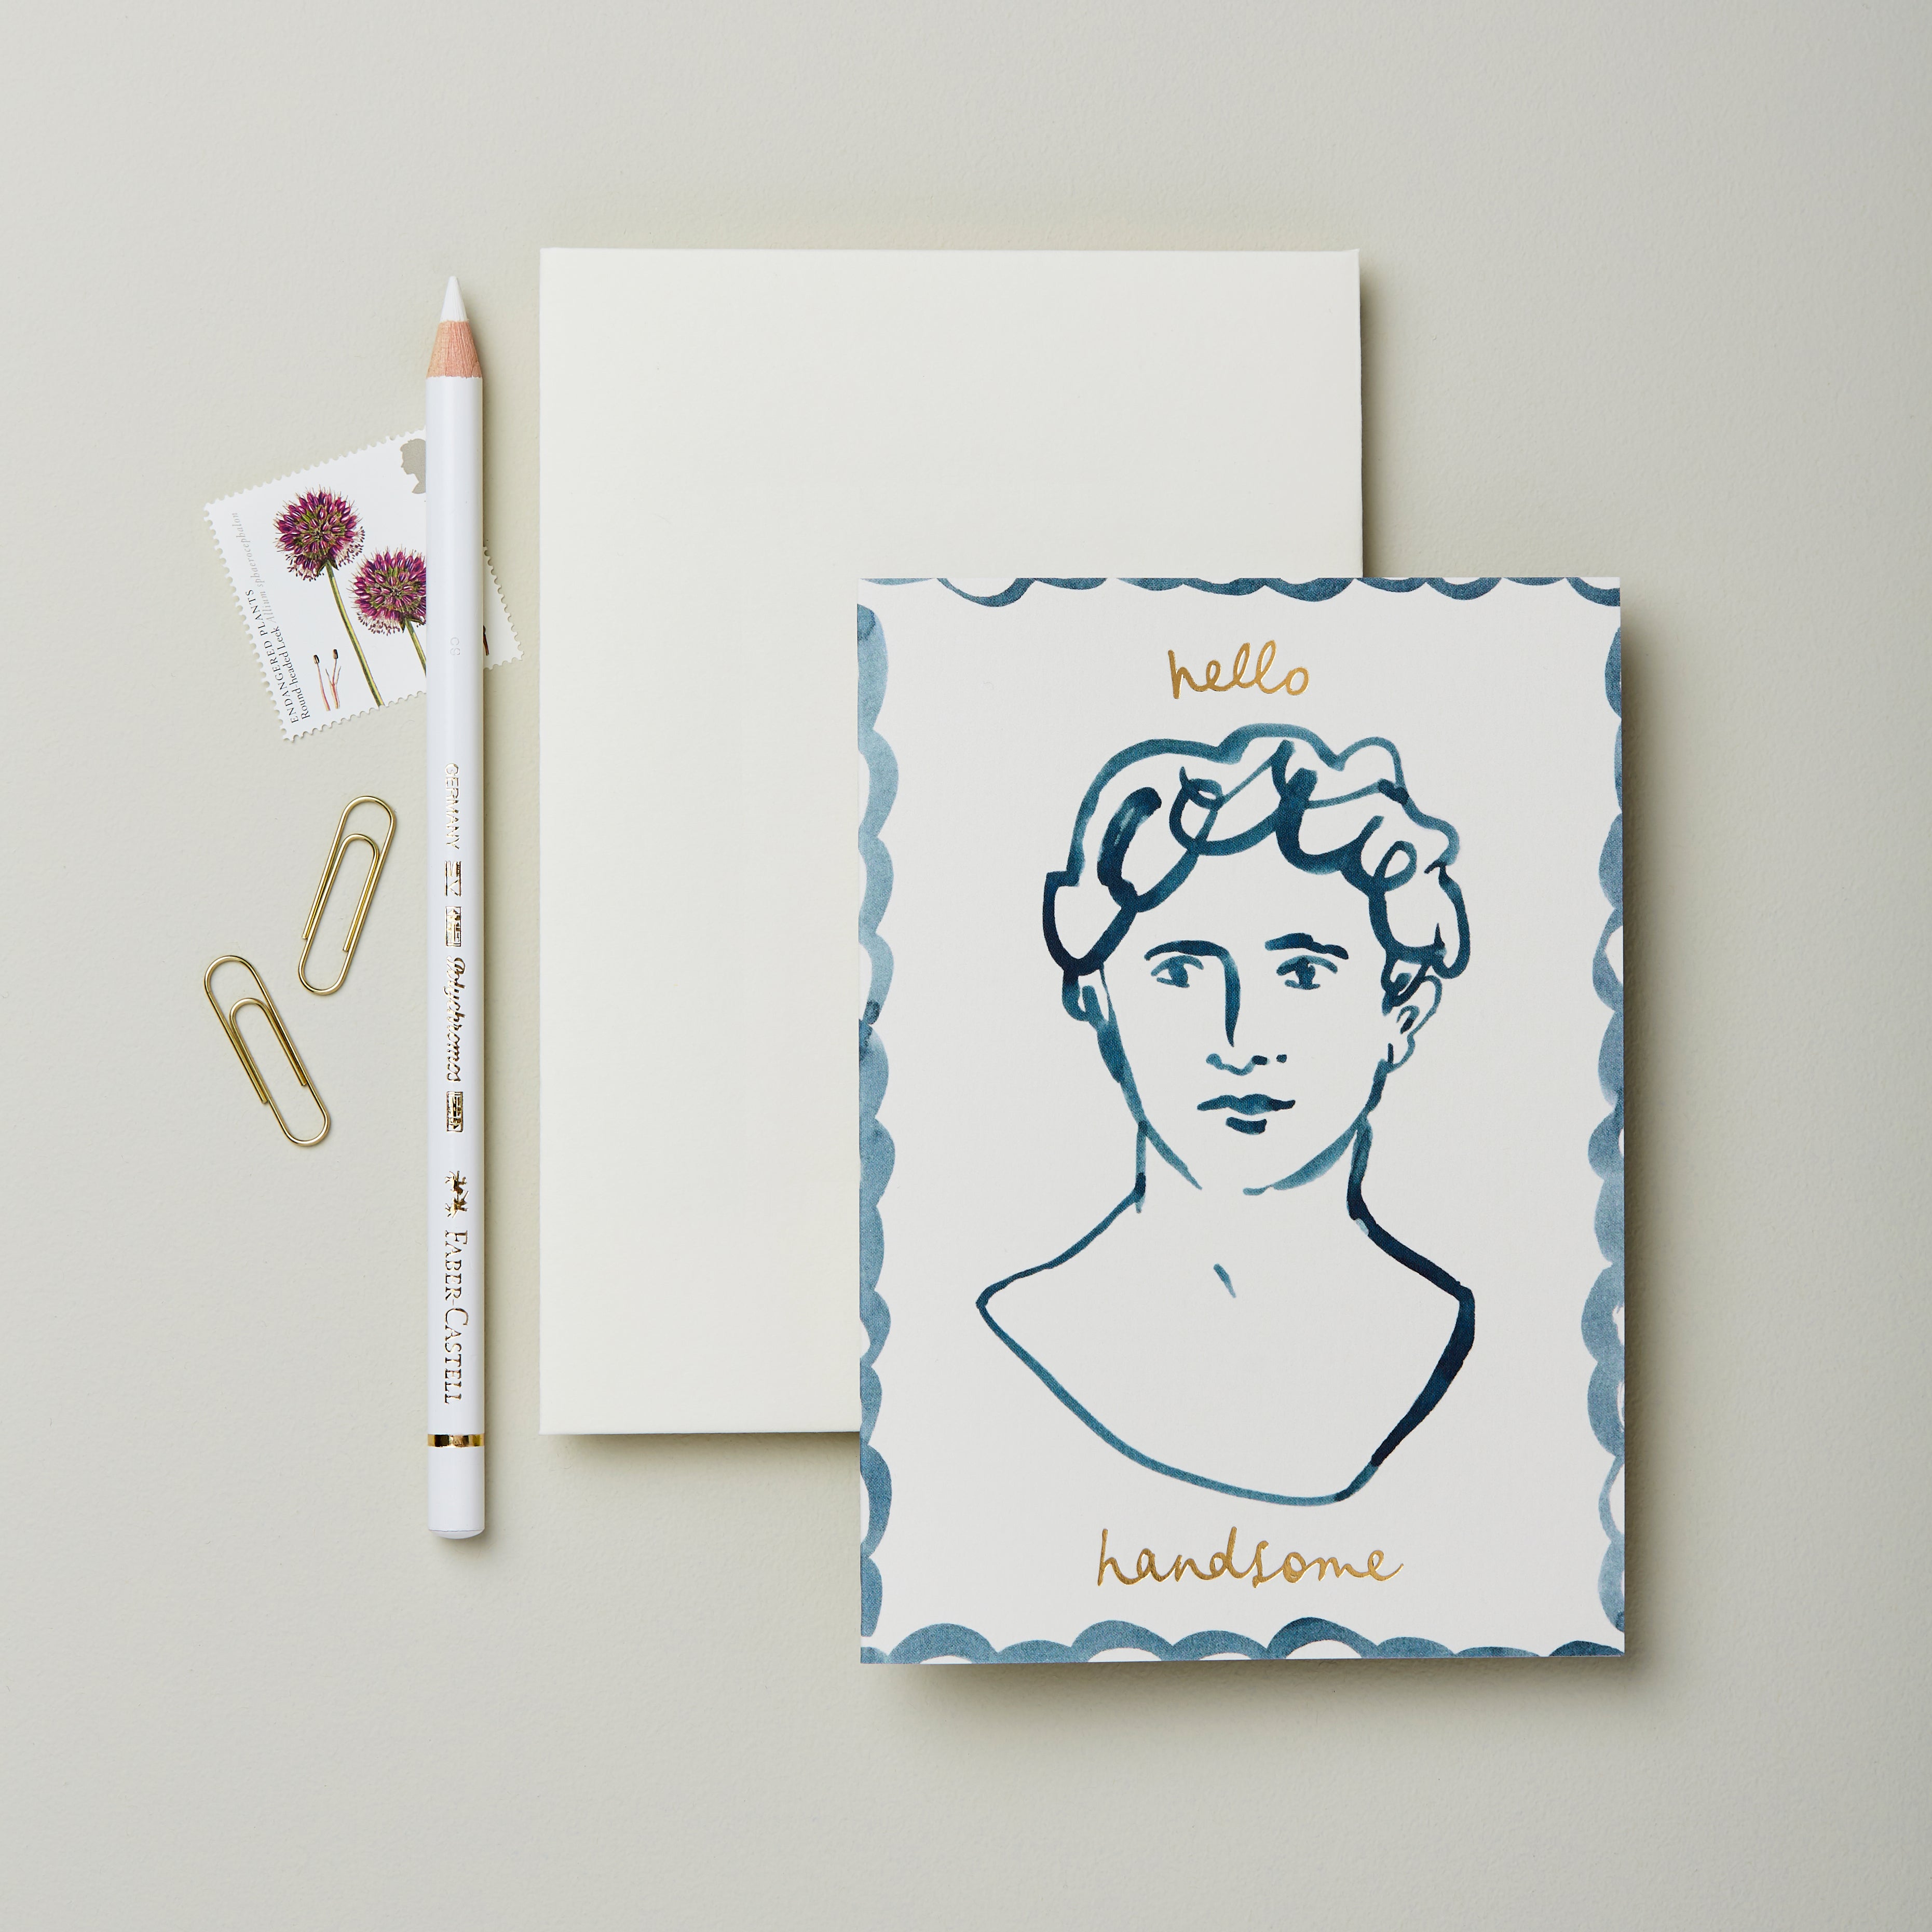 'Hello Handsome' Greetings Card